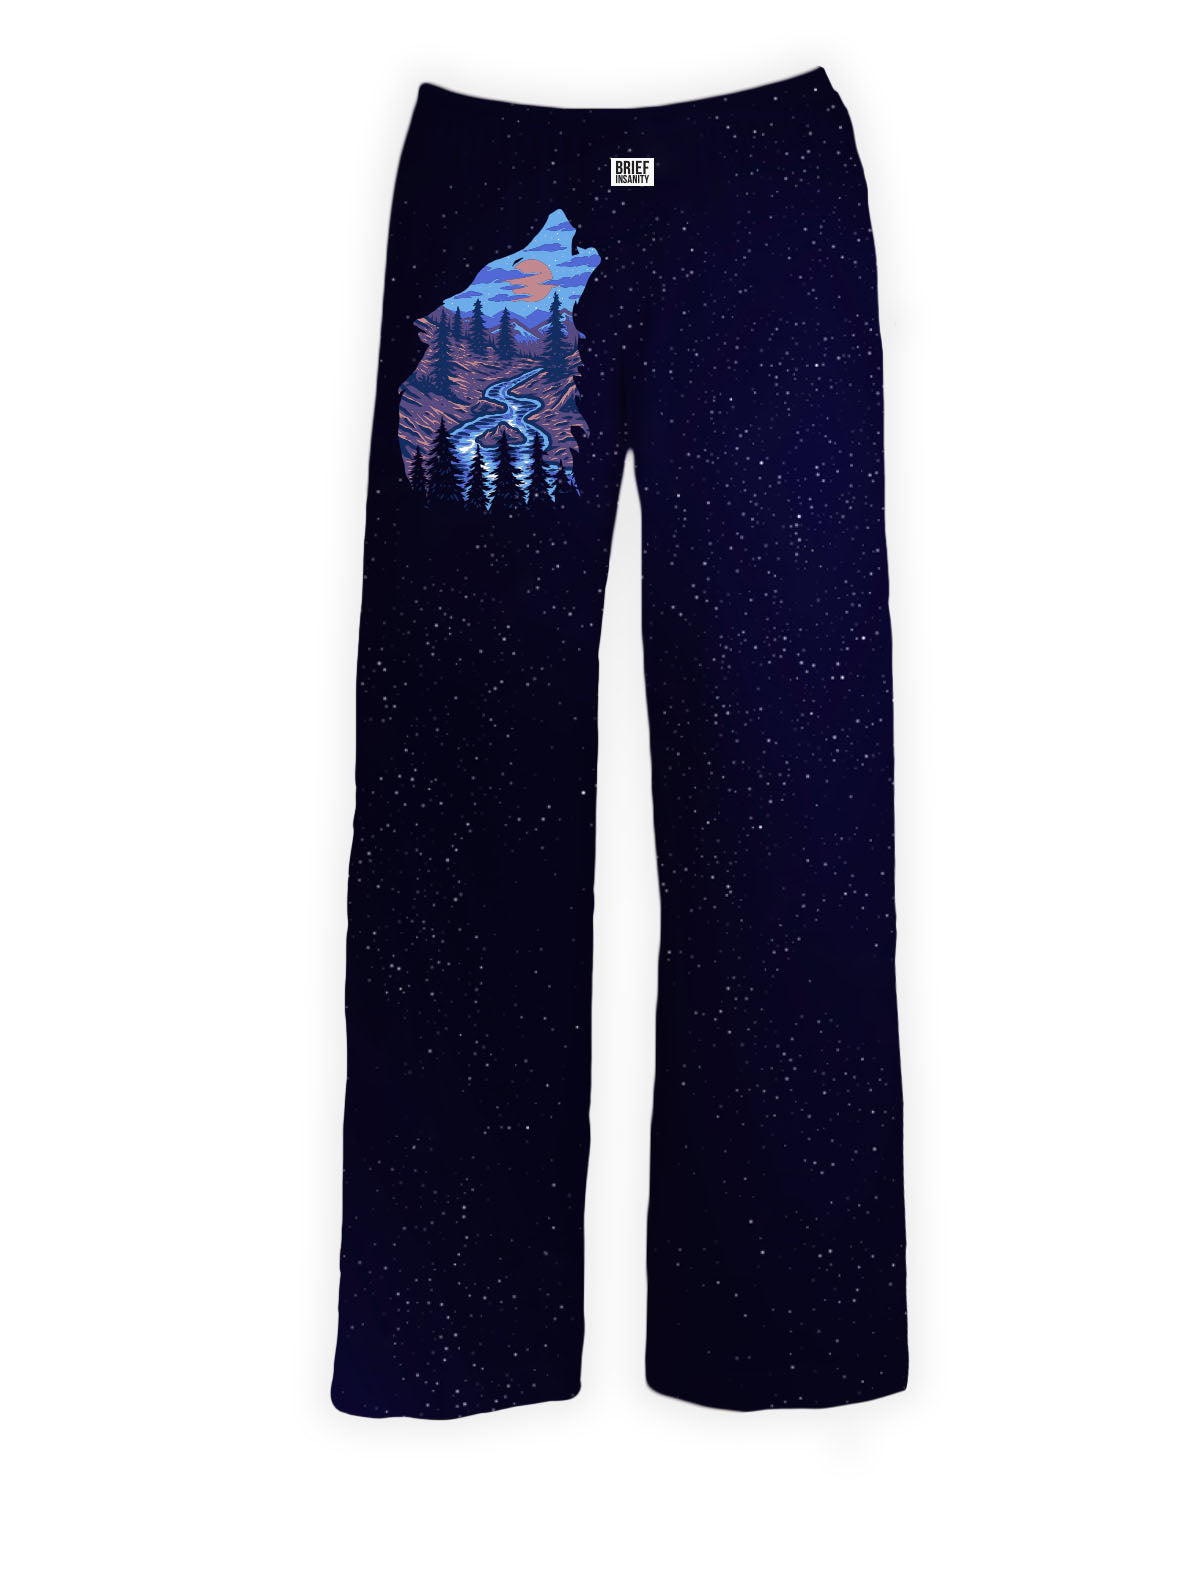 BRIEF INSANITY Wolf in the Stars Pajama Lounge Pants